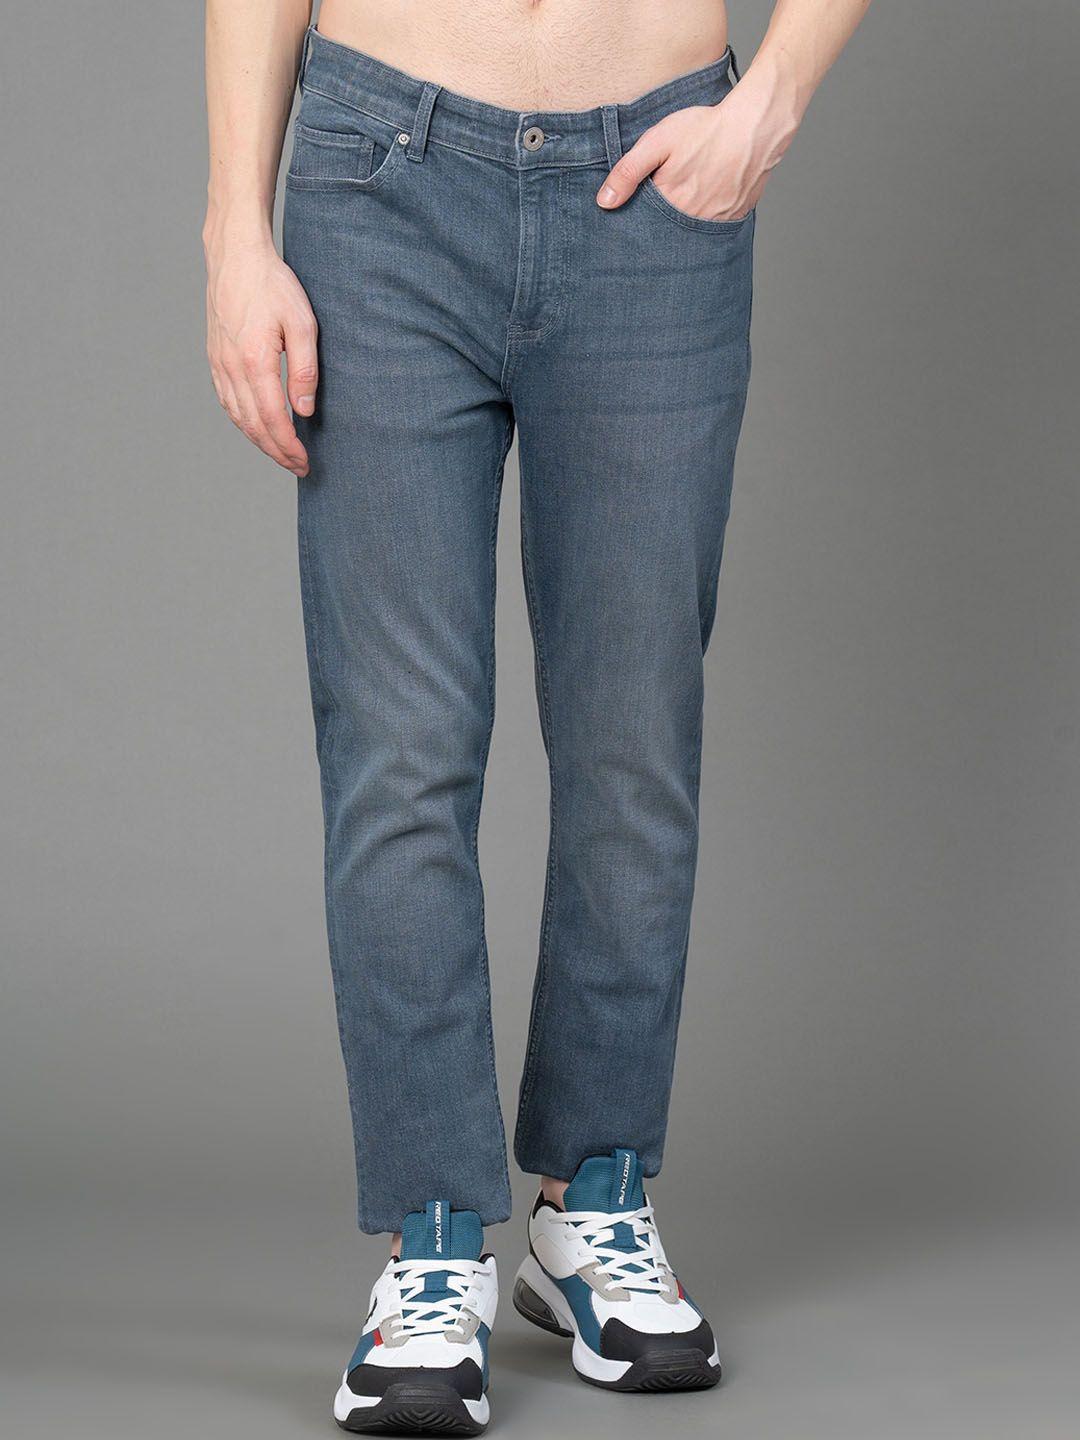 red tape men light fade stretchable jeans